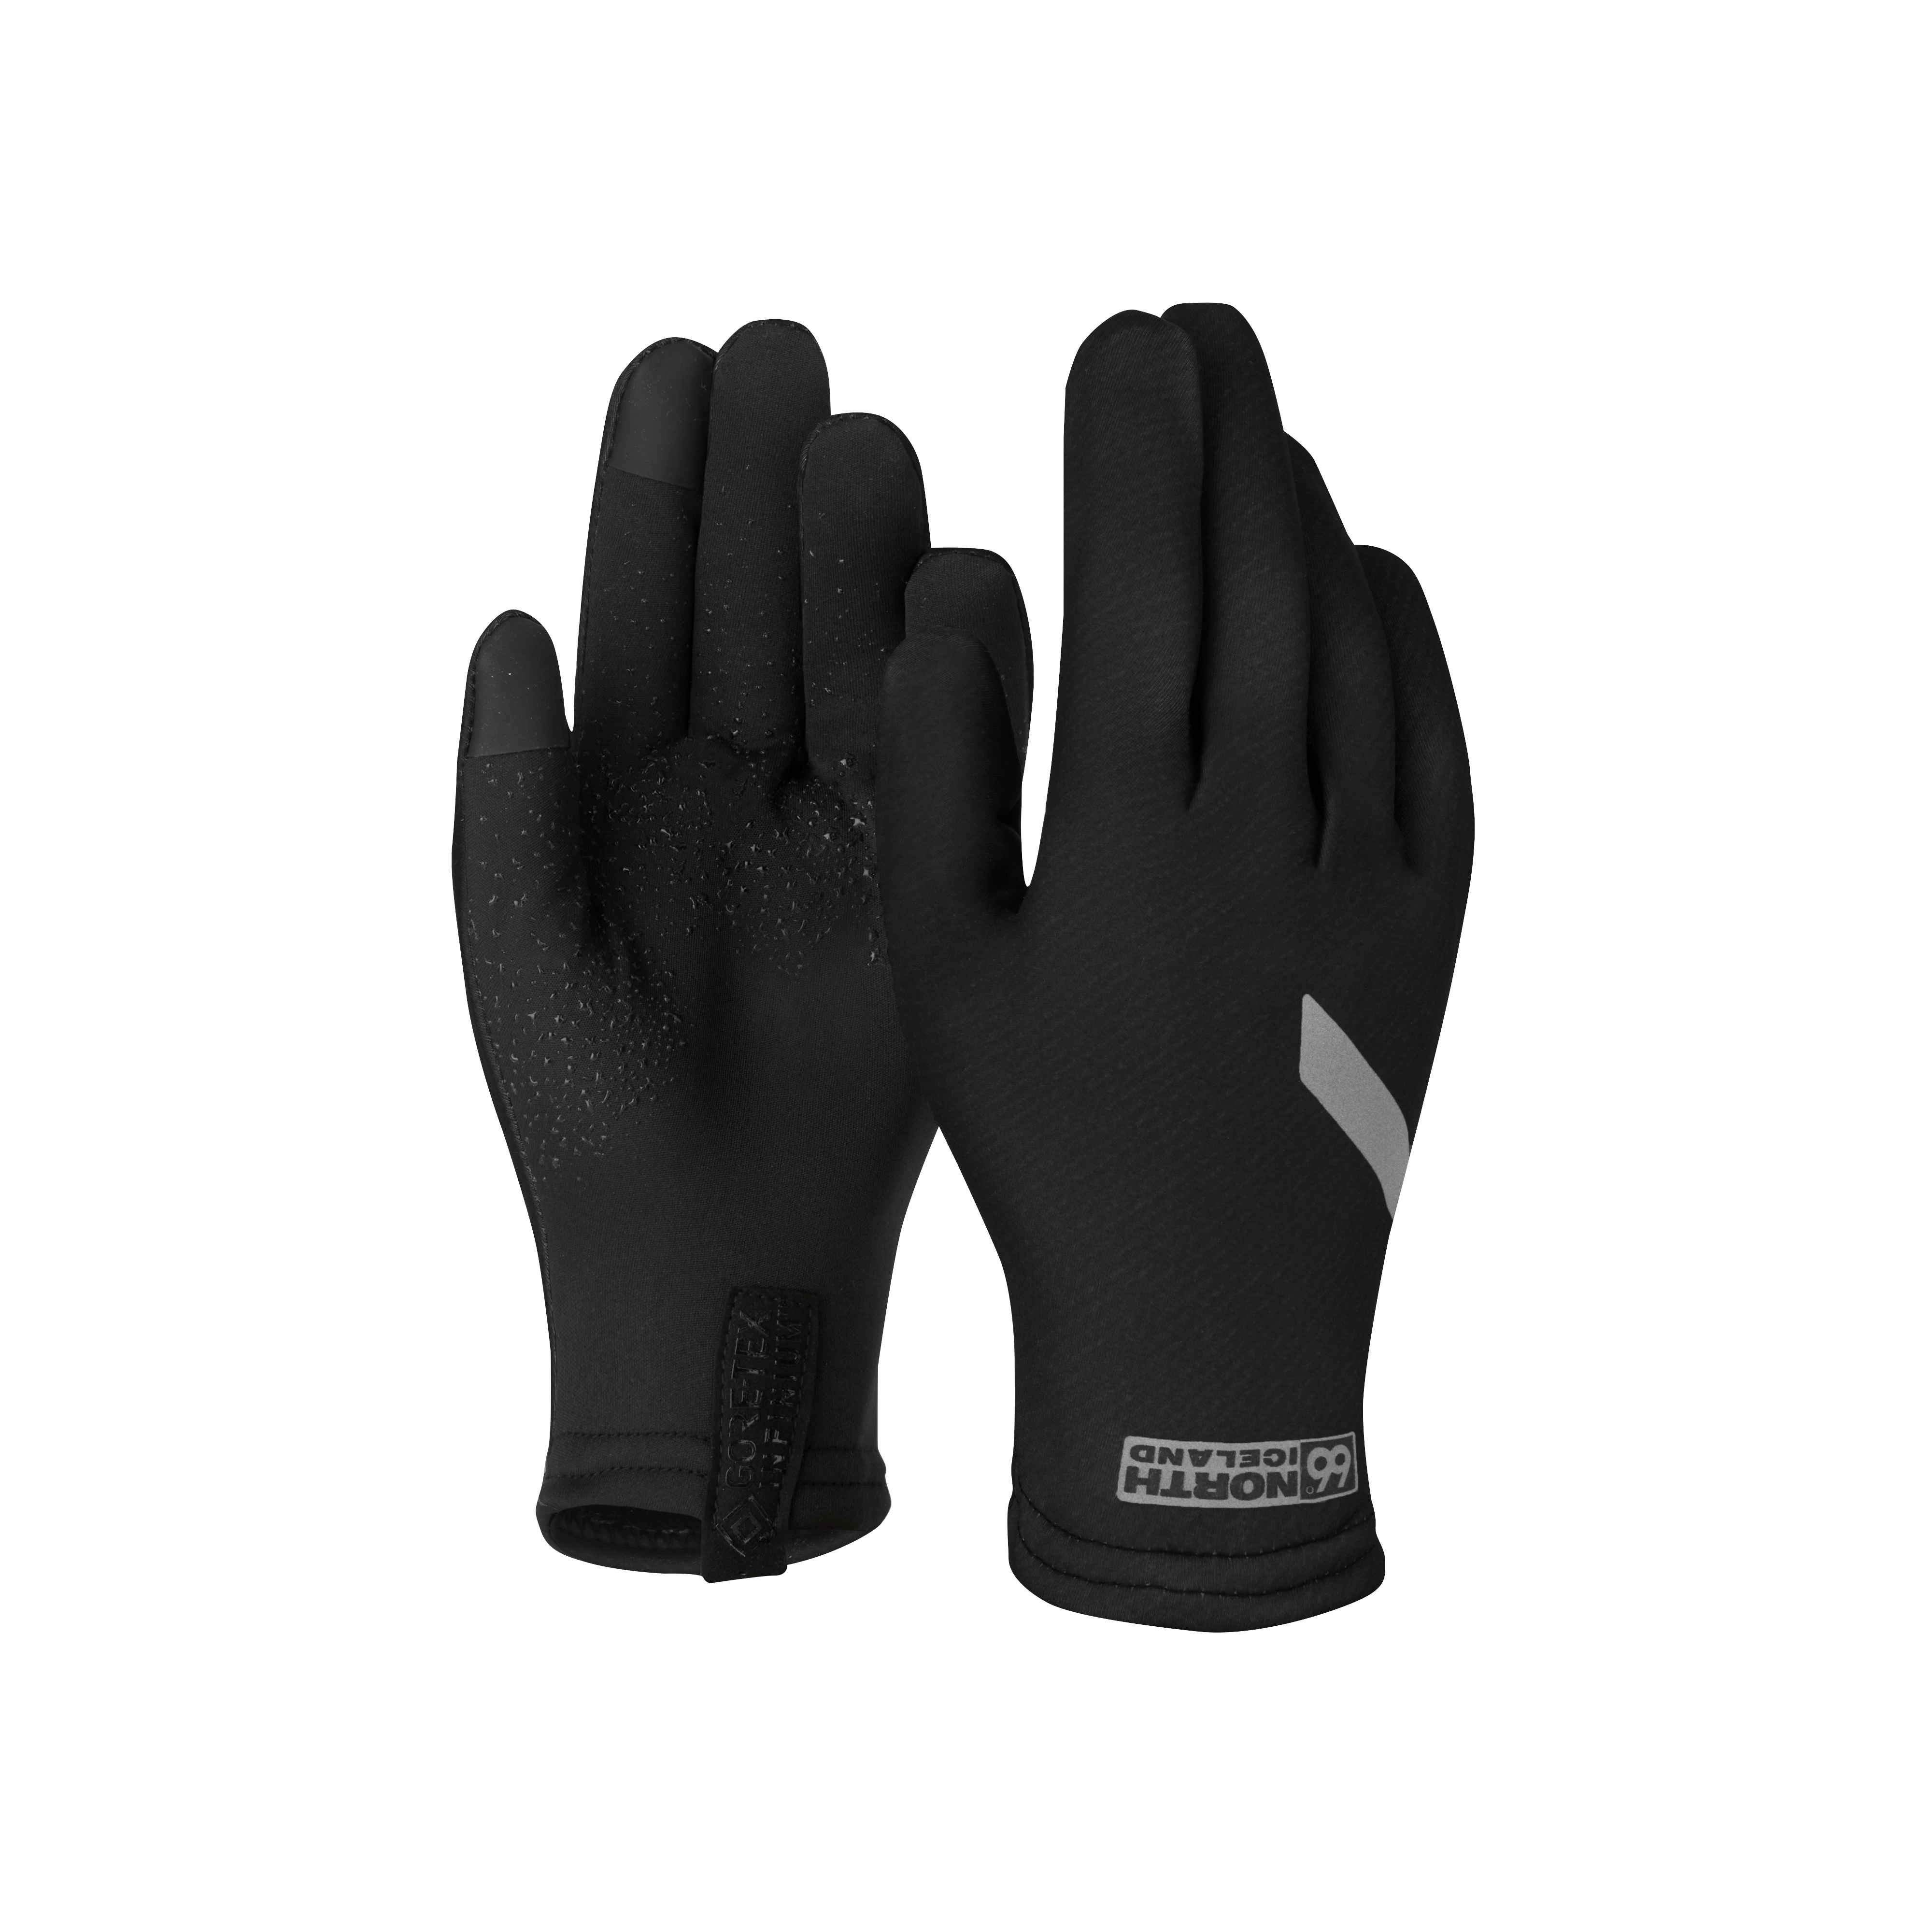 66 North Mens Snfell Accessories - Black - S